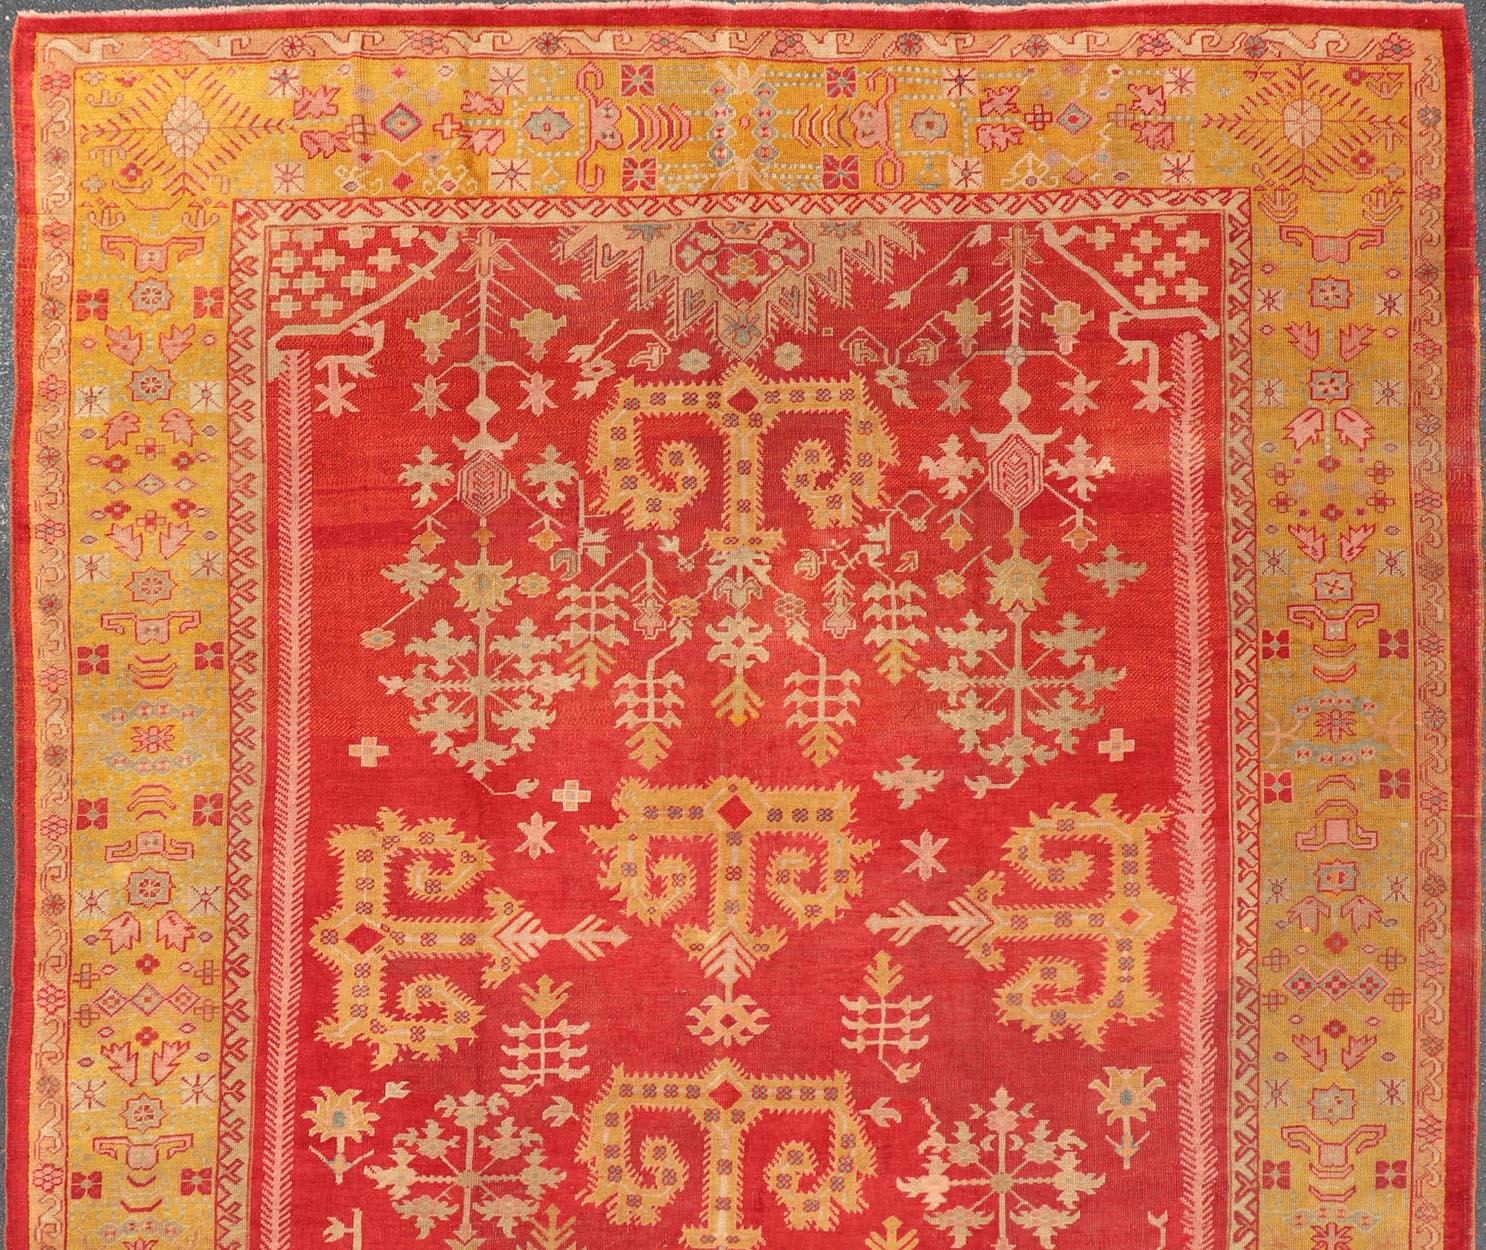 Antique Turkish Oushak Rug in Royal Red and Saffron Gold with Geometric Design For Sale 3